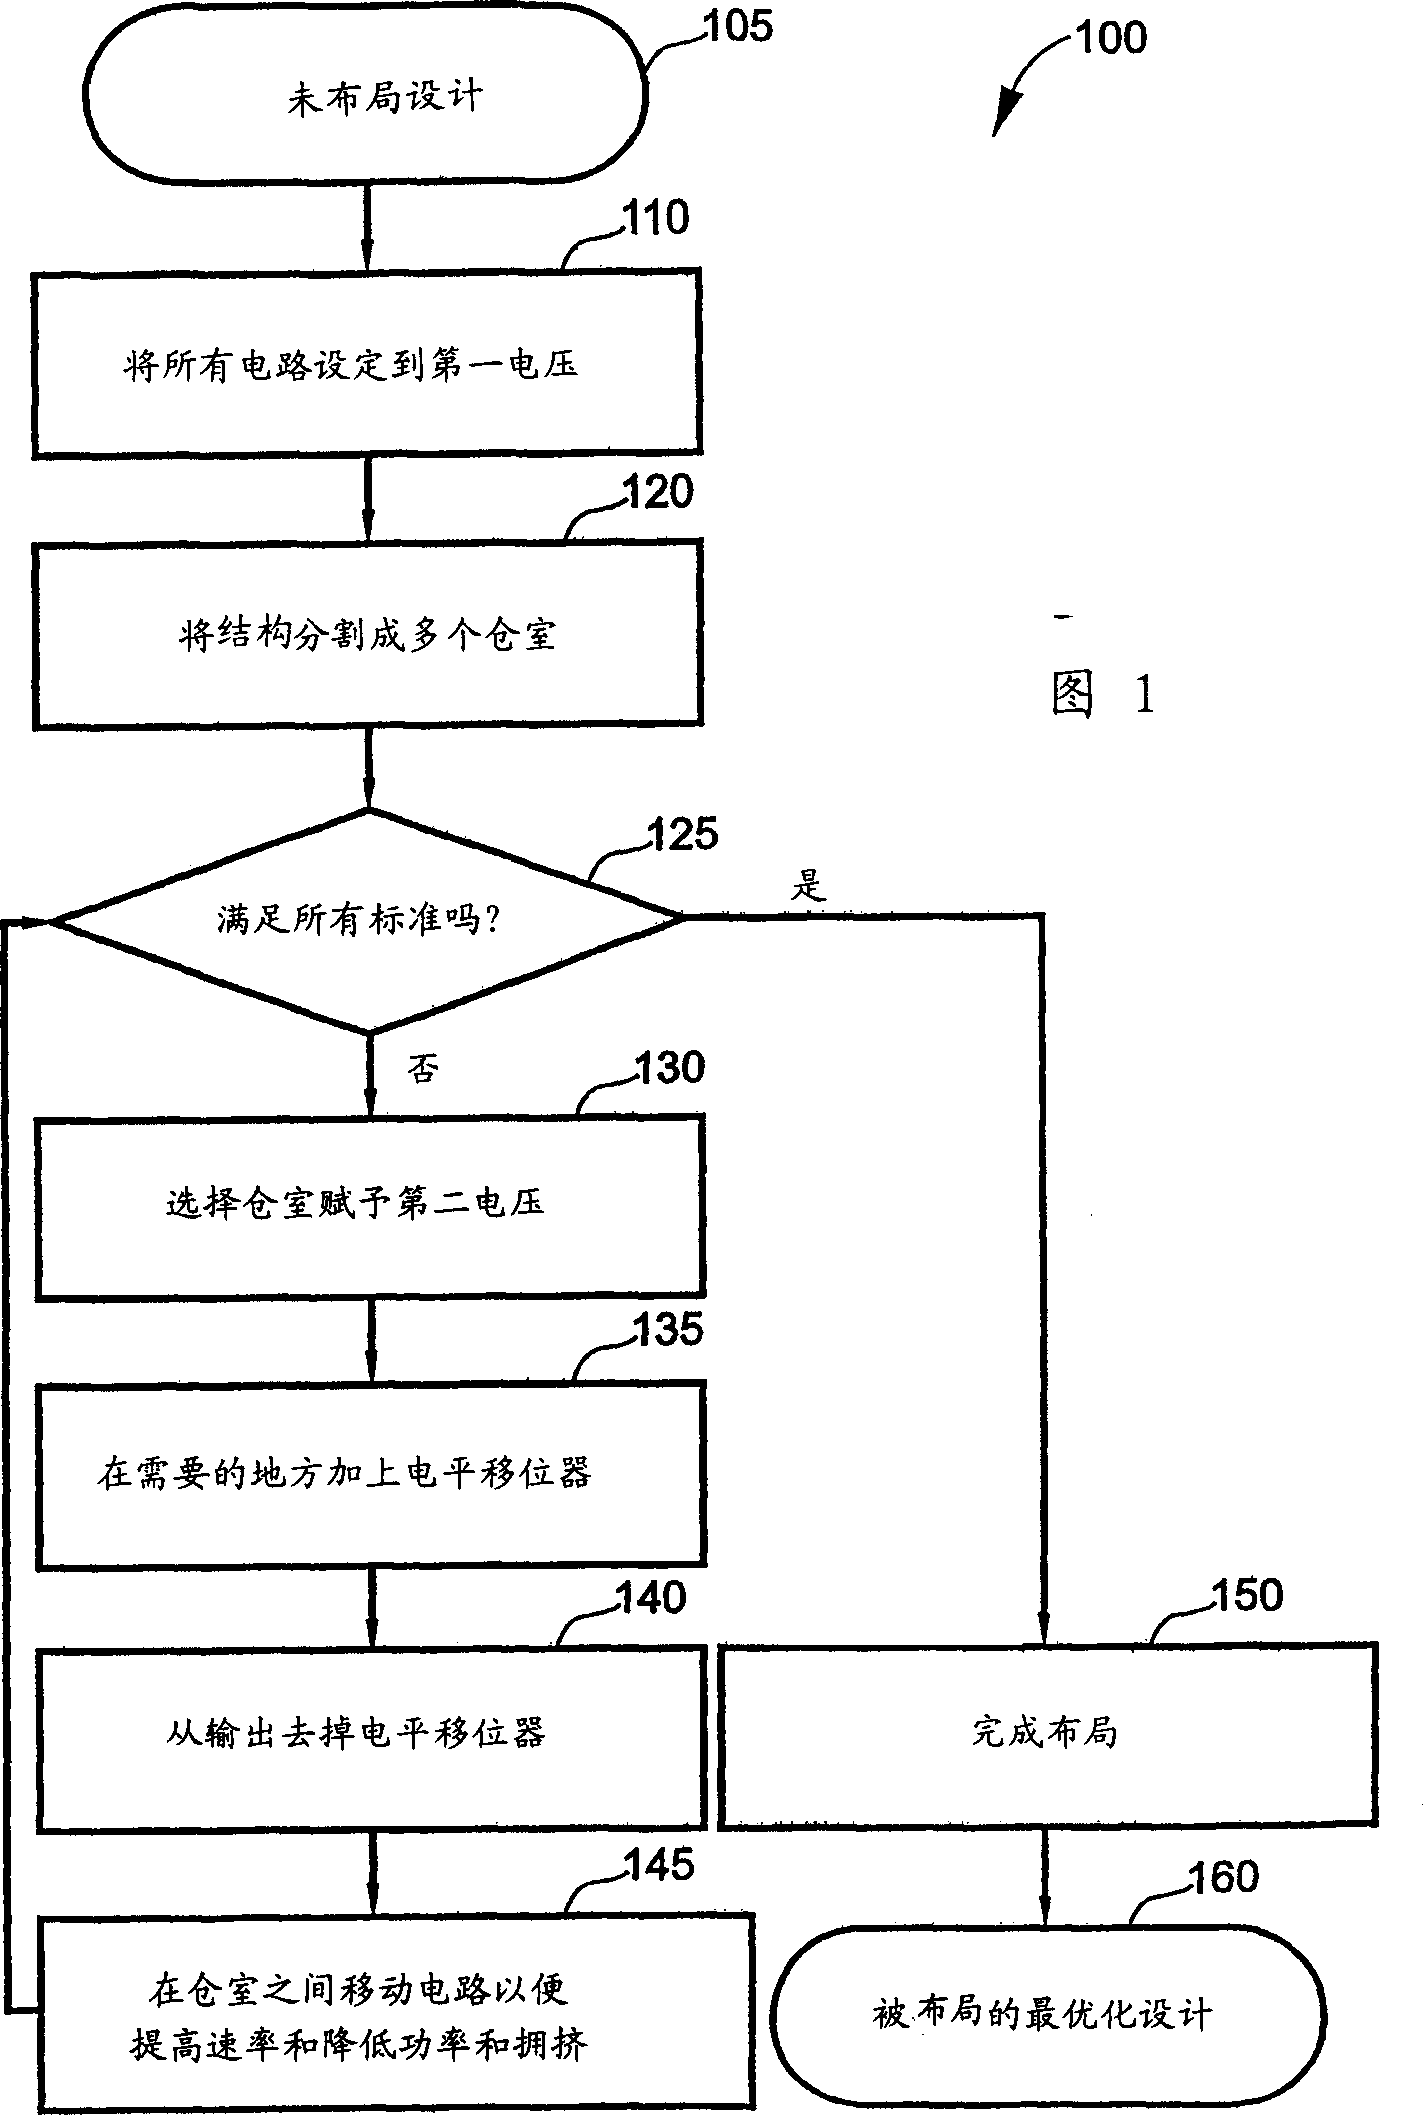 Design method of semiconductor chip